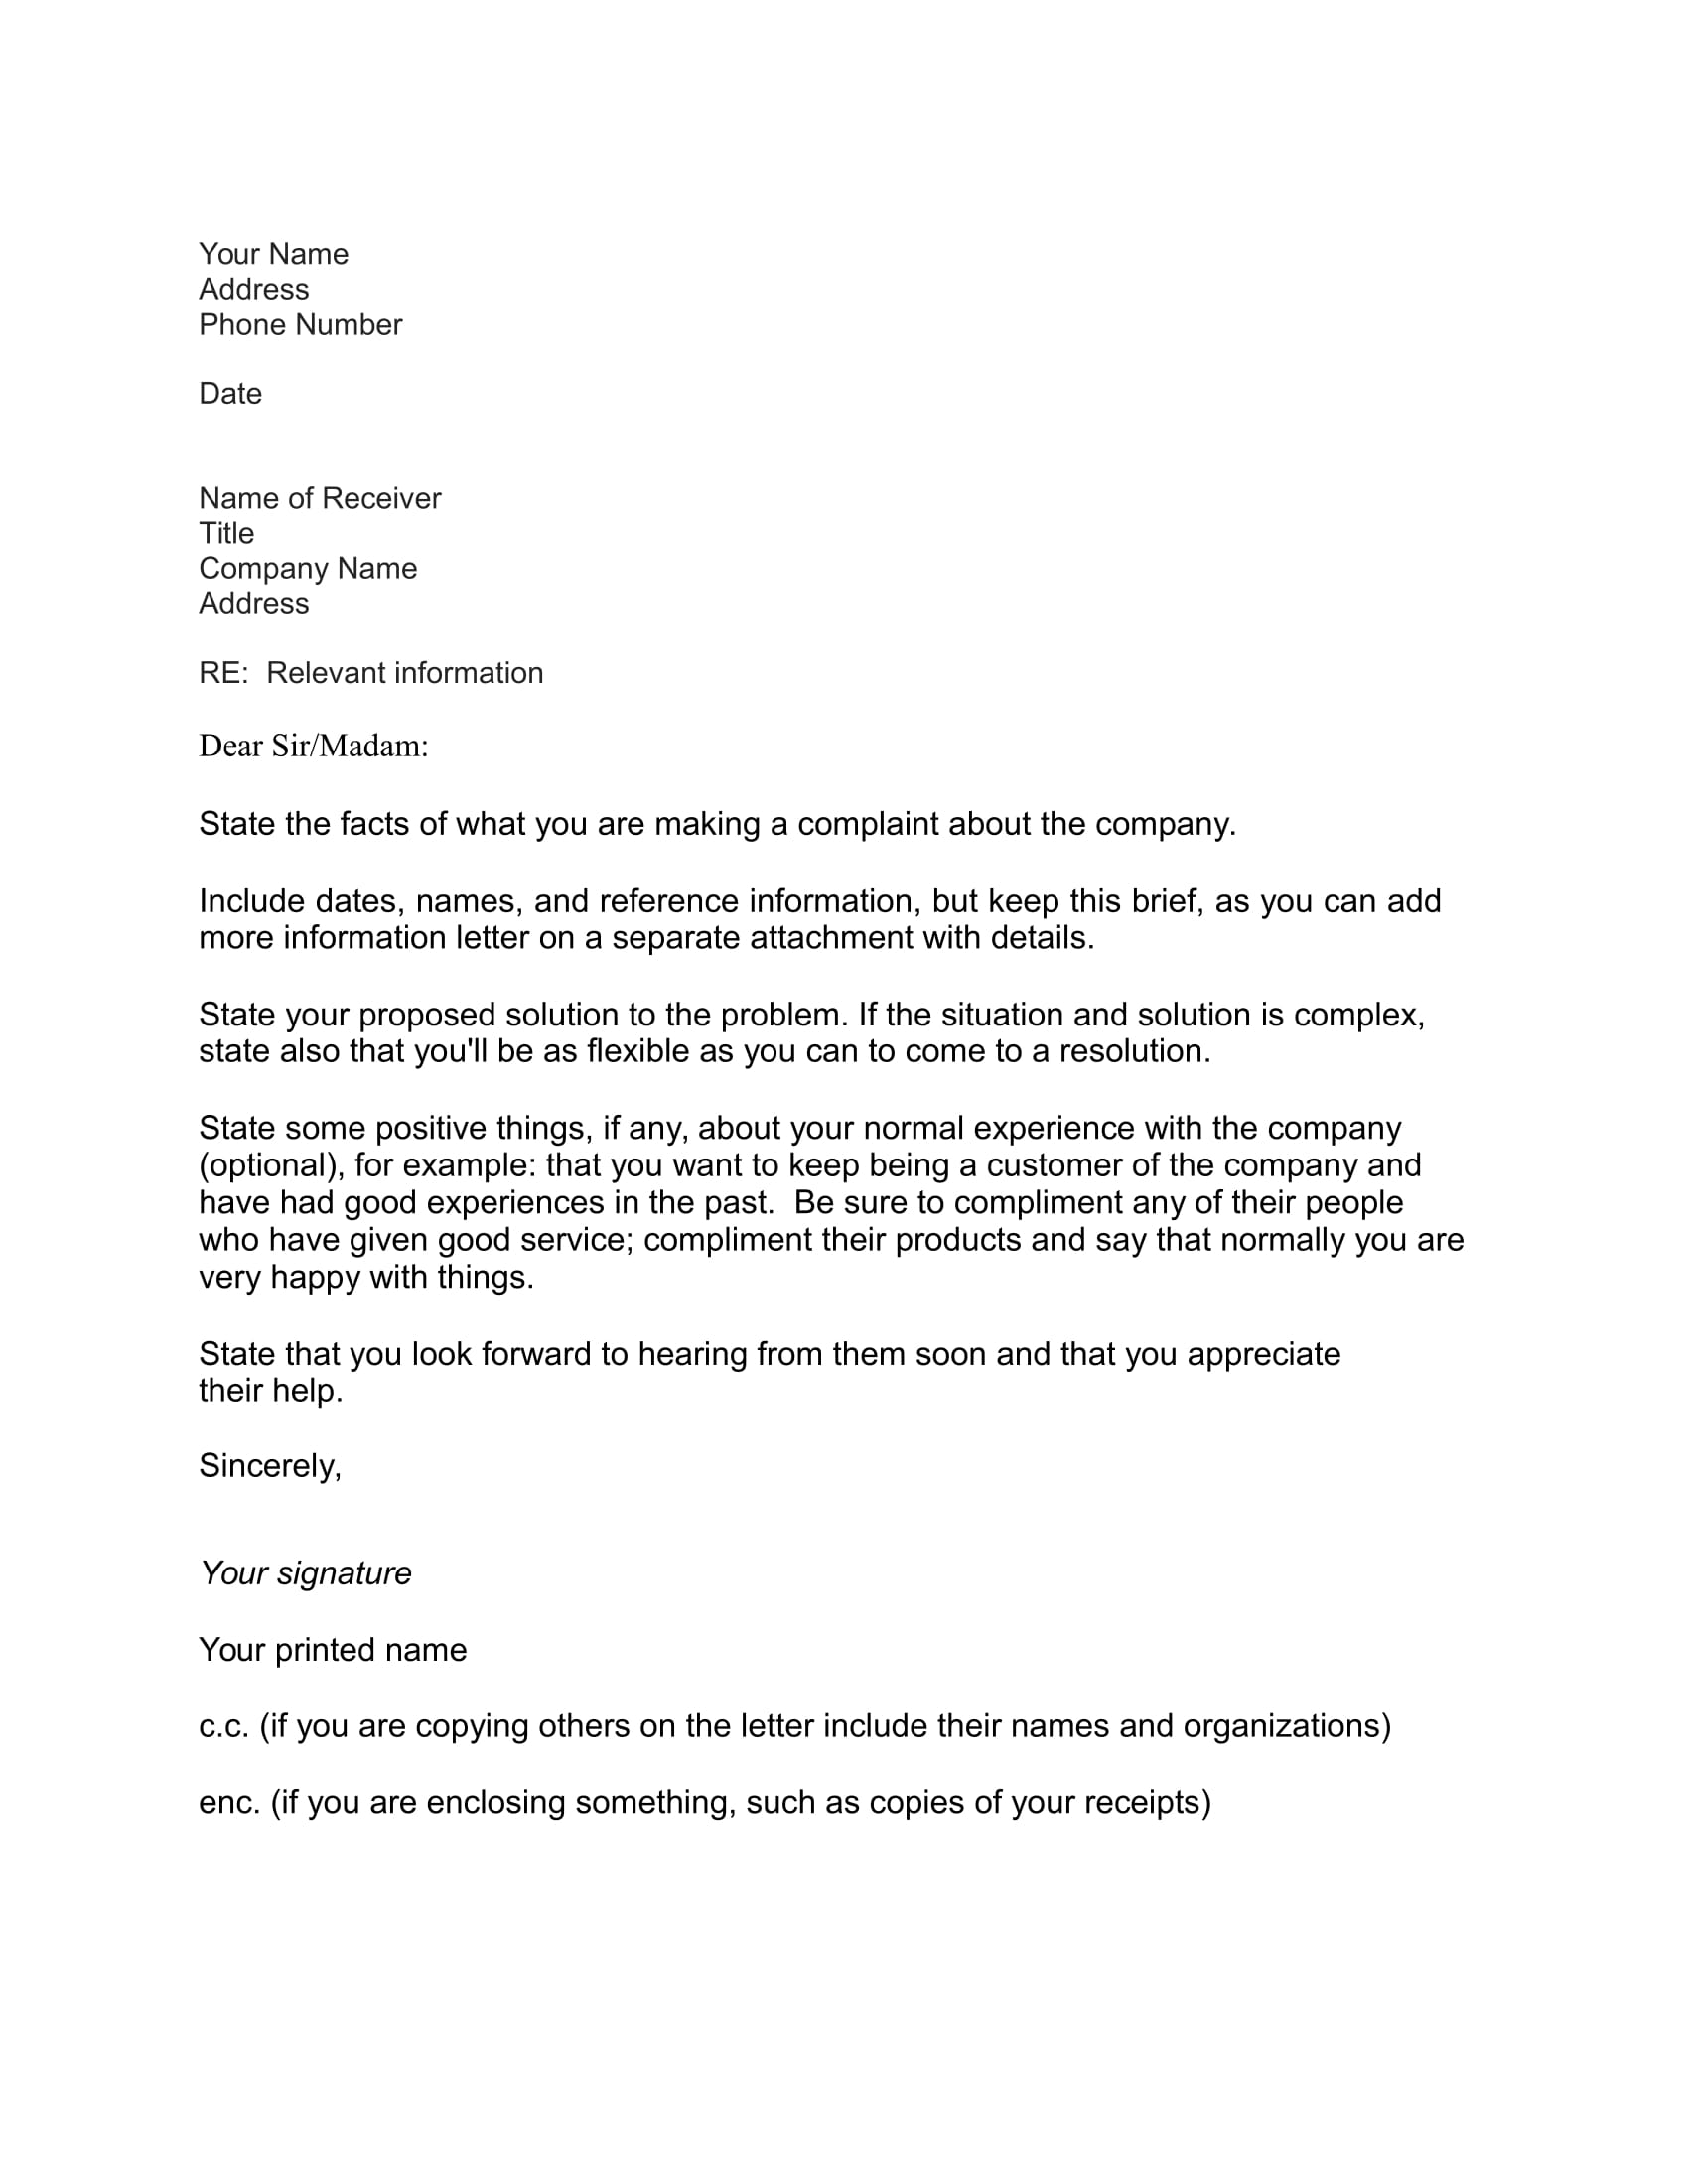 company-complaint-letter-sample-free-download